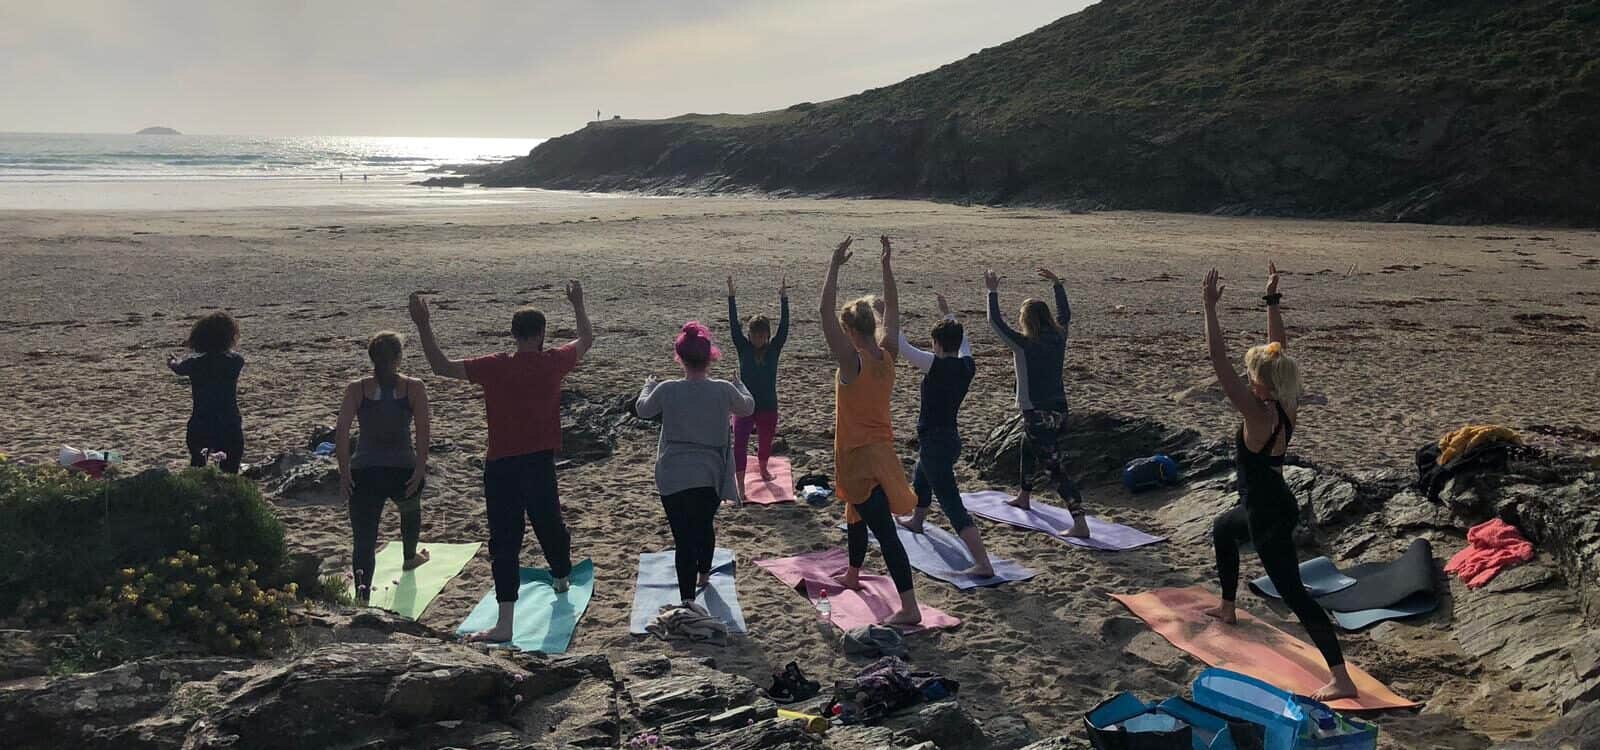 Sailing provides an opportunity for mindfulness and meditation, which are key to emotional regulation and resilience. Several of our vessels even welcome you to join in with morning boat or beach yoga sessions and mindfulness walks ashore.